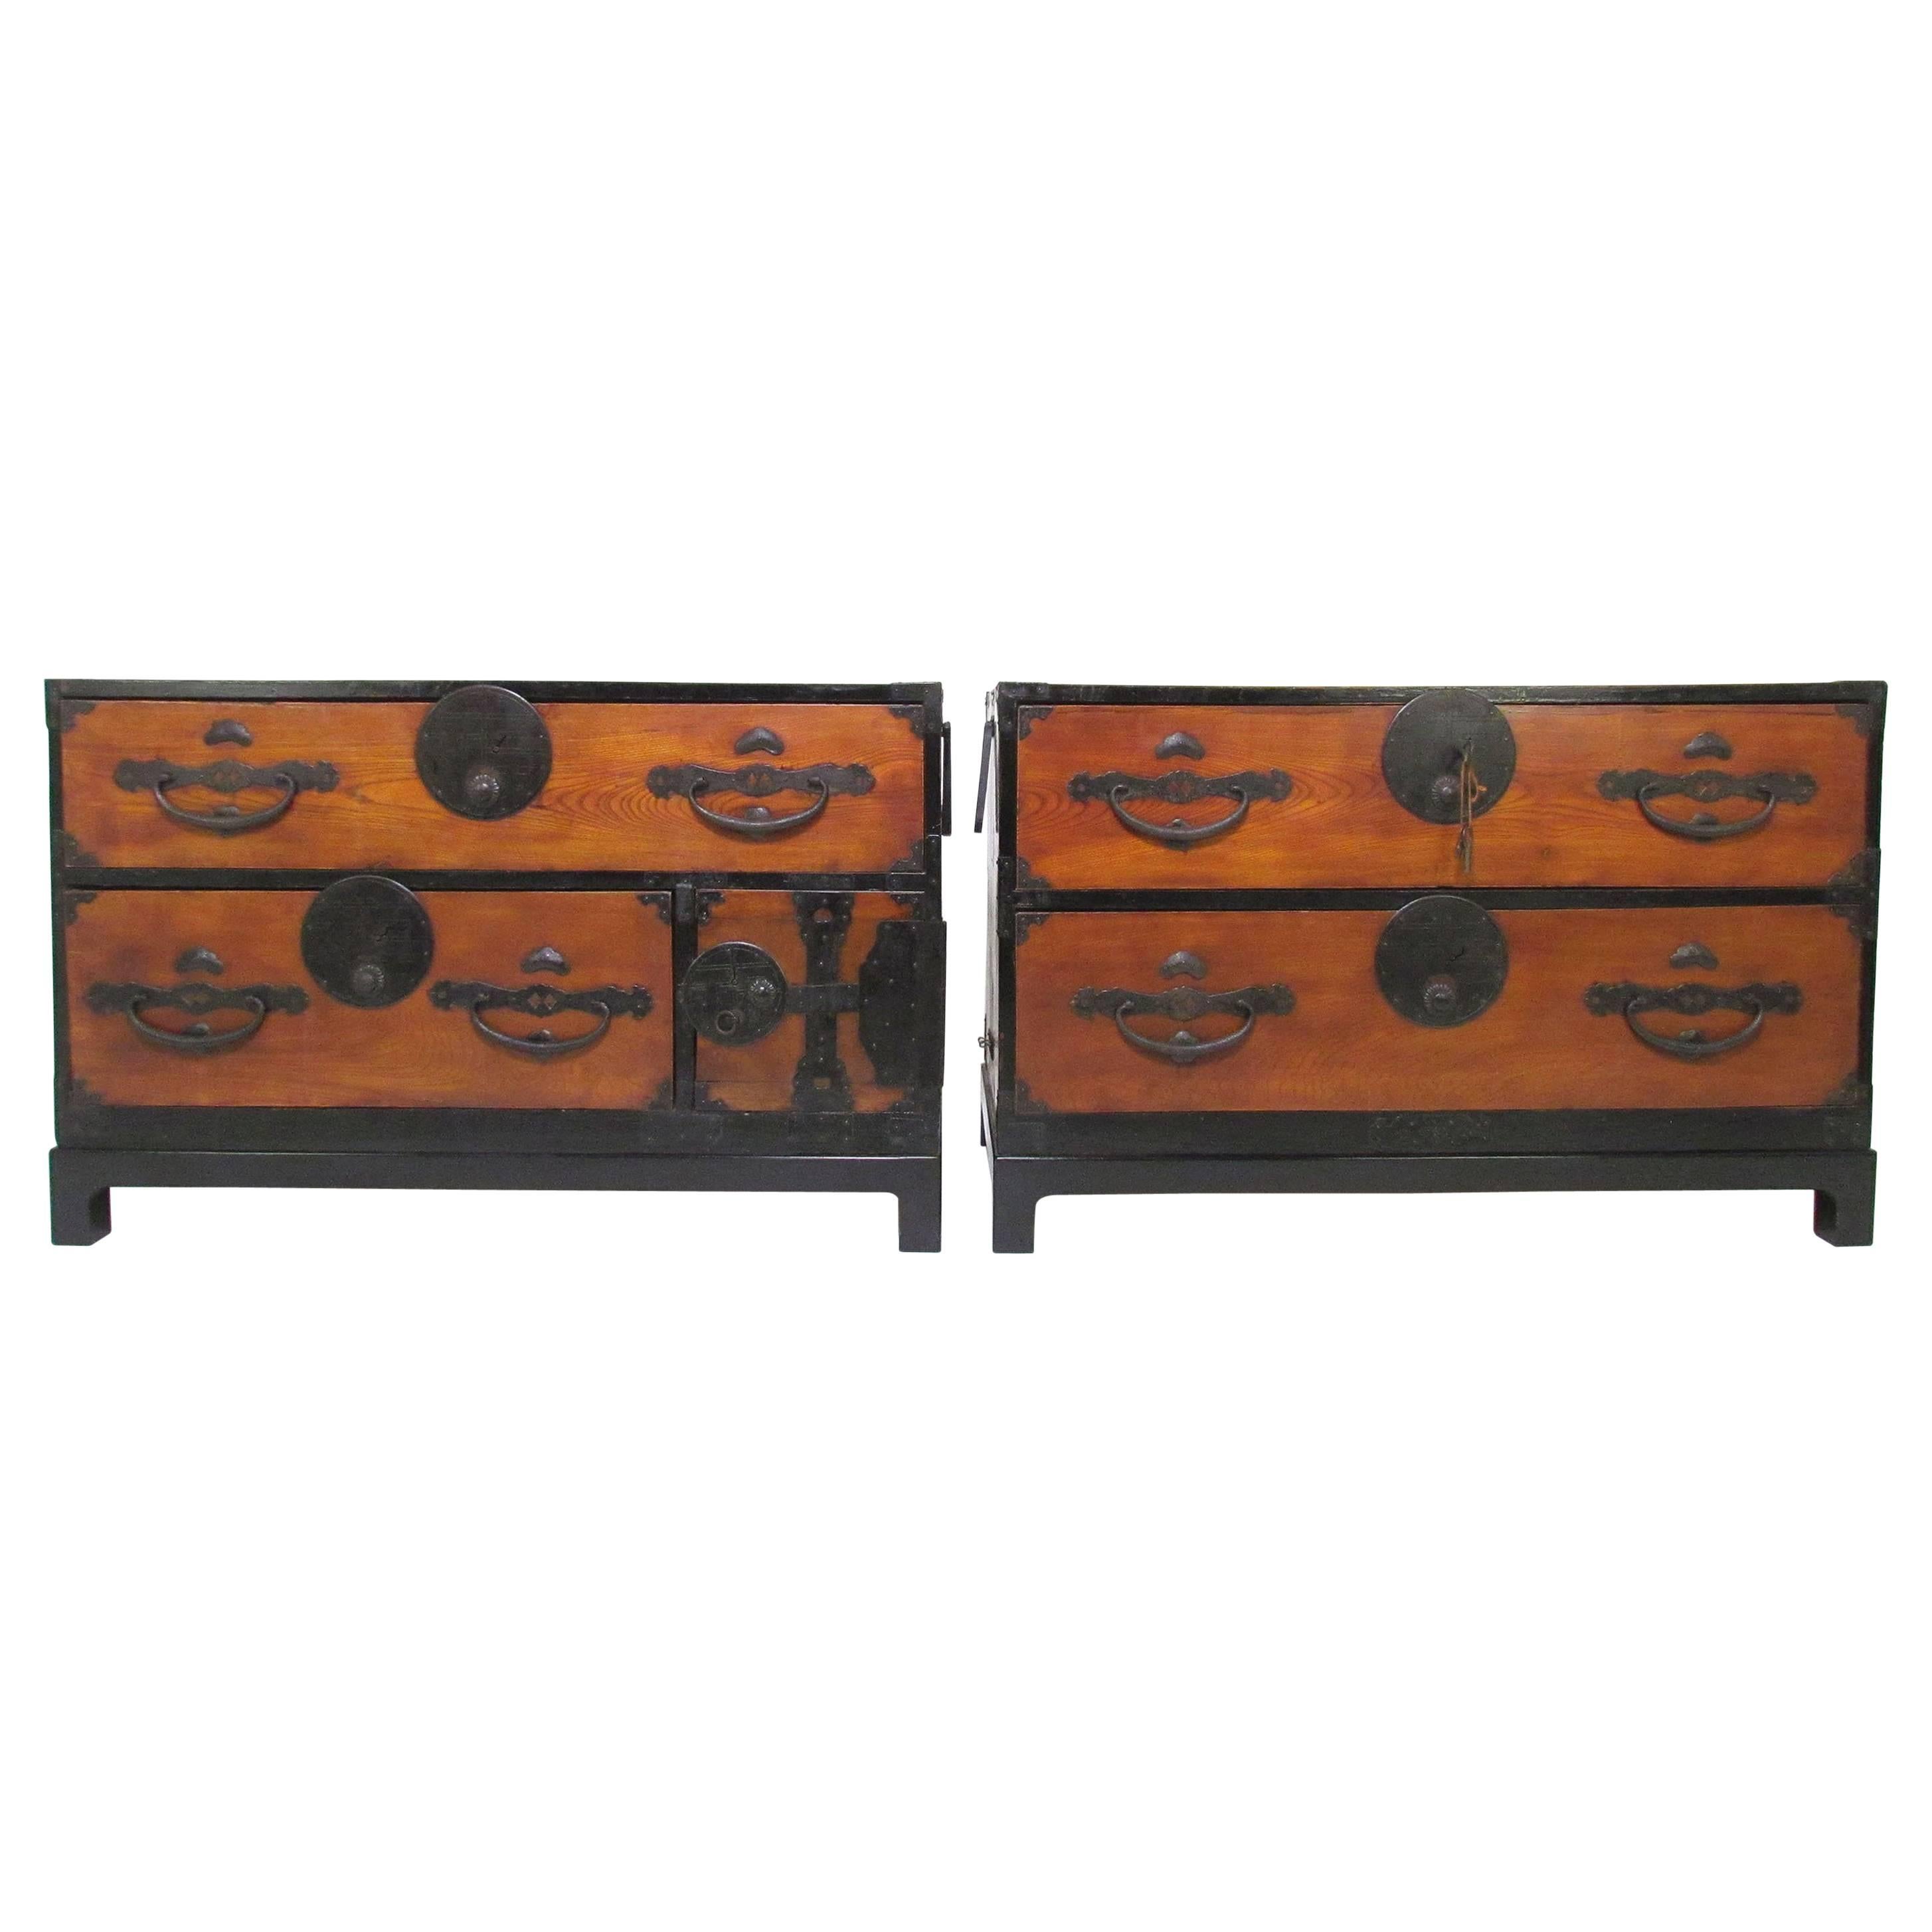 Pair of Antique Meiji Period Japanese Tansu Low Chests